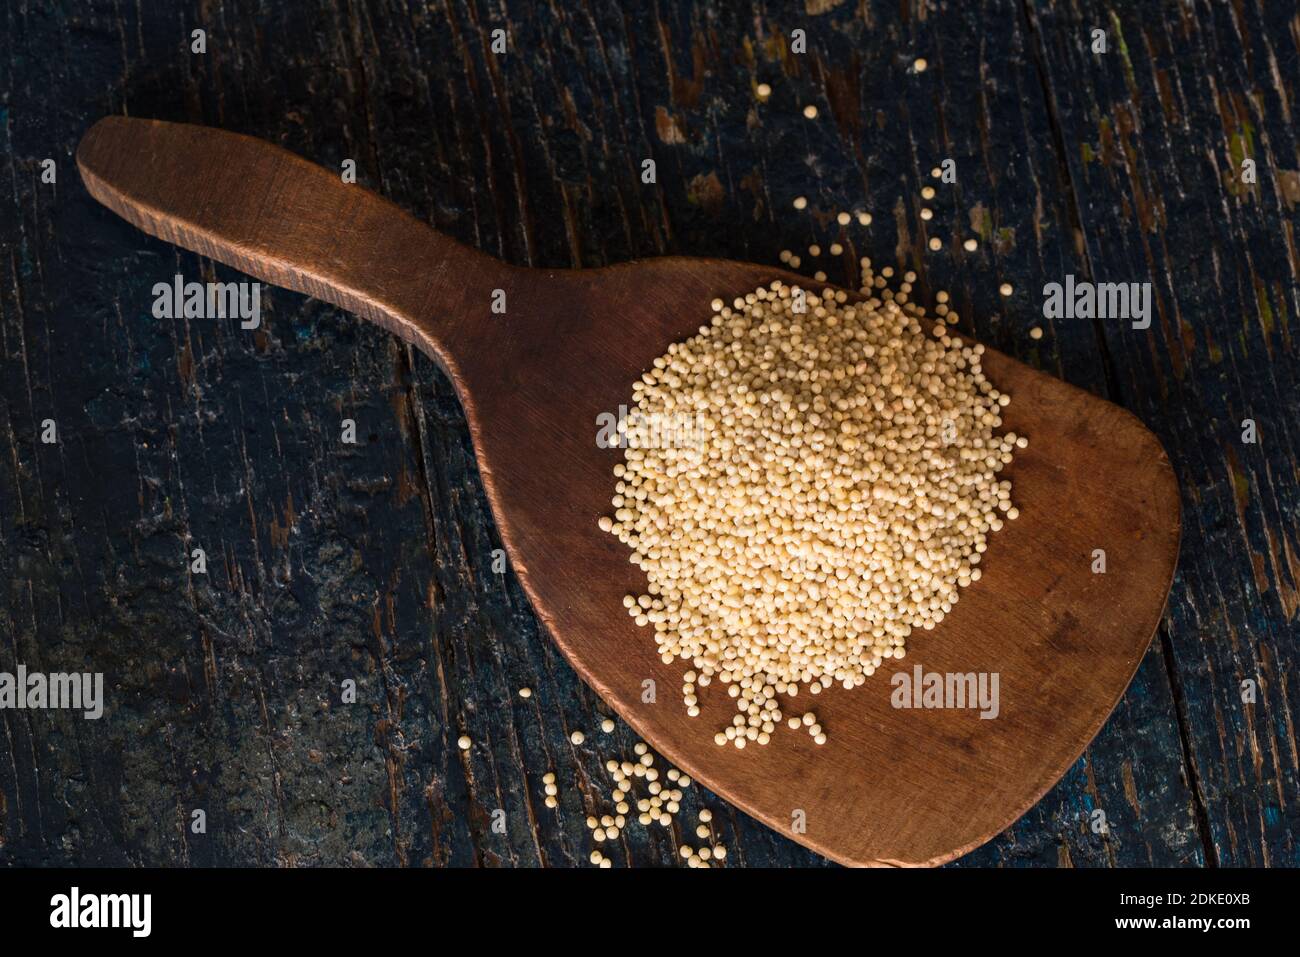 Close-up Of Ingredients In Wooden Spoon On Table Stock Photo